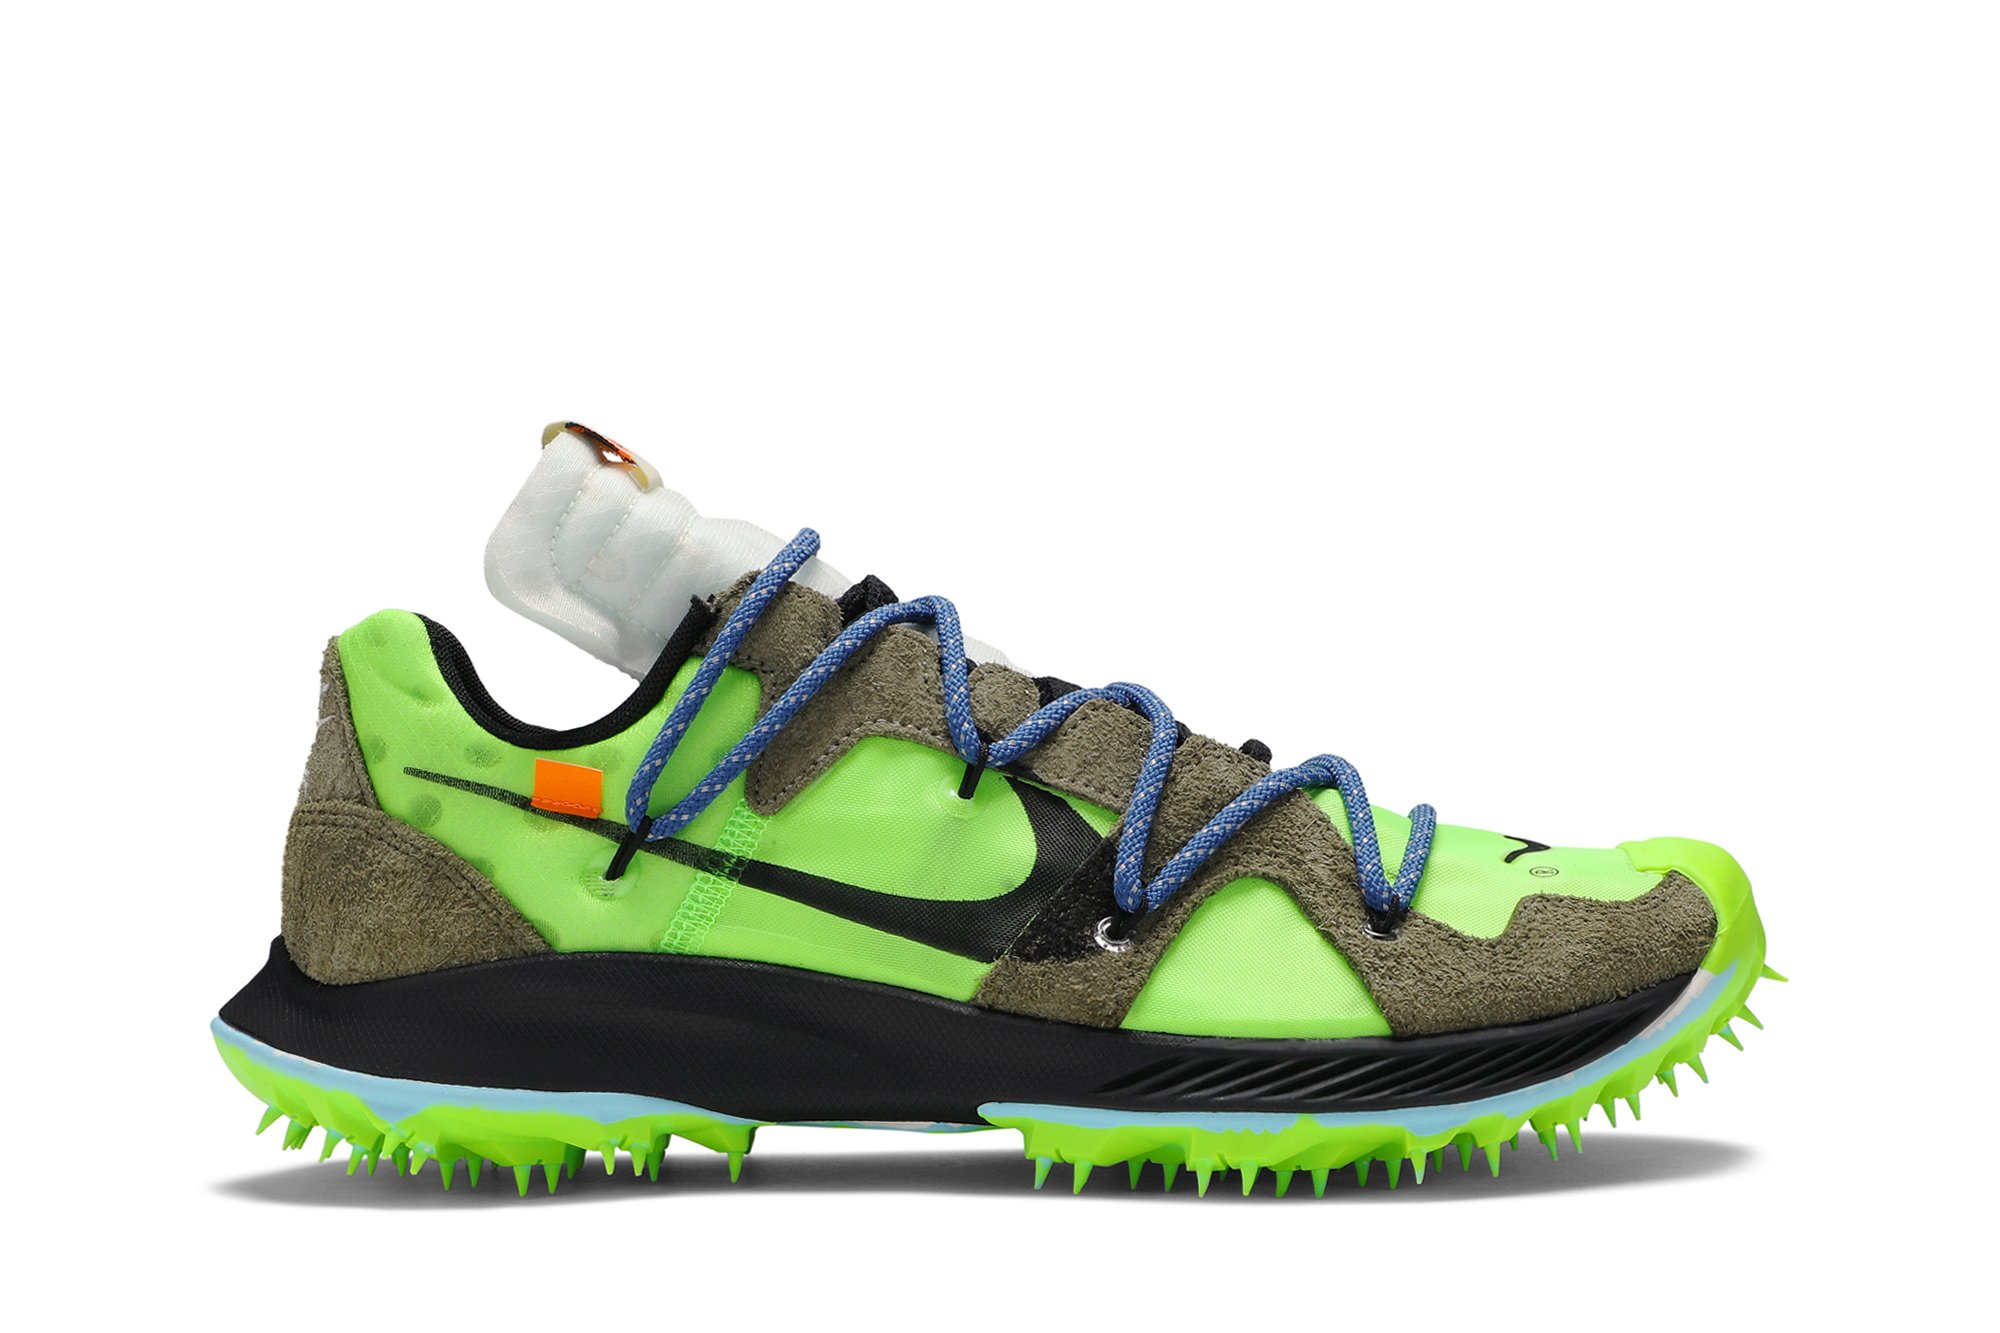 Buy Off-White x Wmns Air Zoom Terra Kiger 5 'Athlete in Progress 